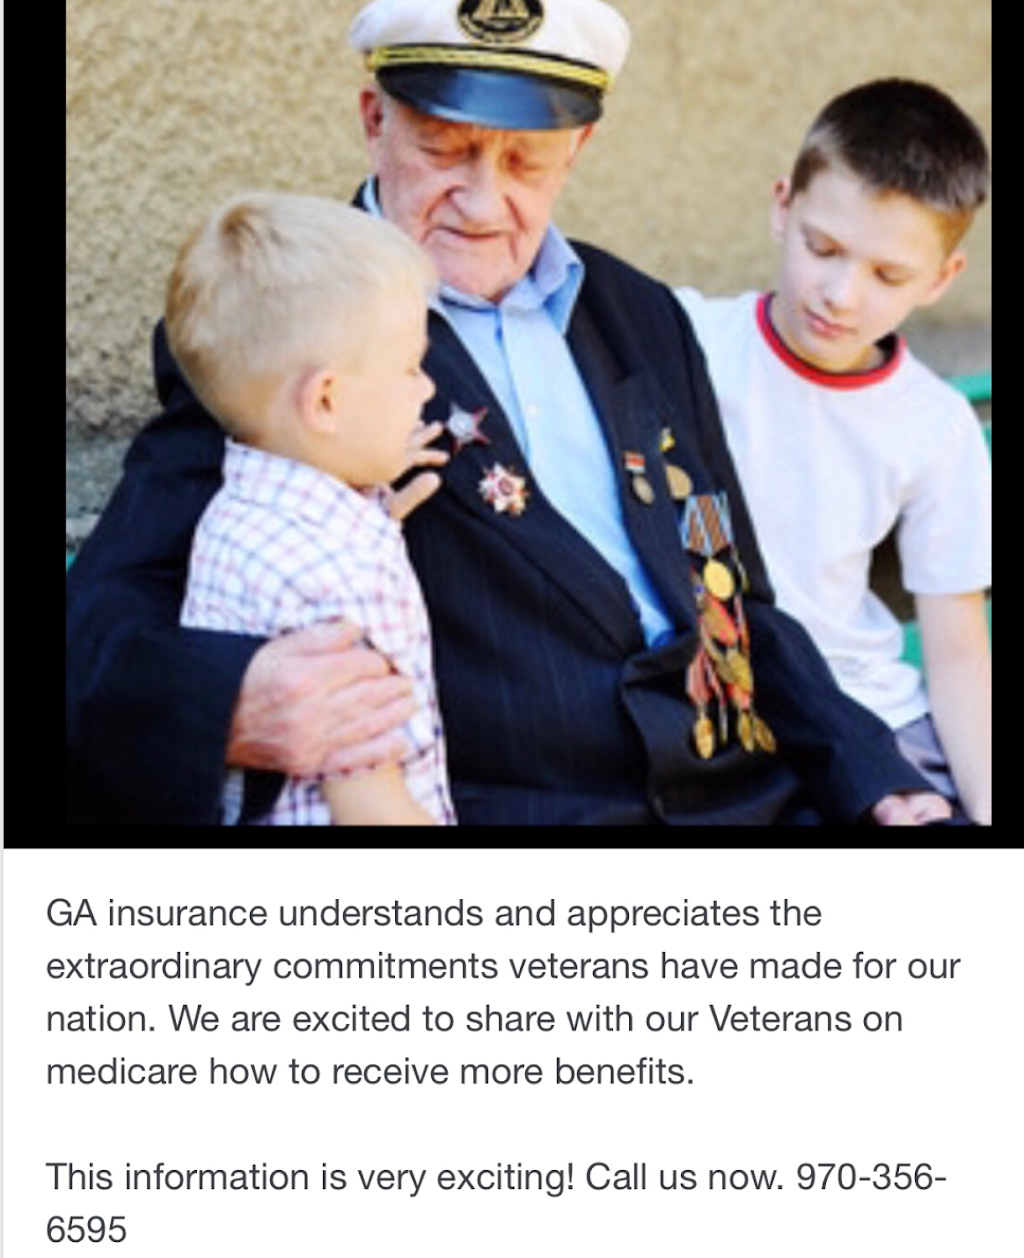 GA Insurance Senior Insurance and Retirement Services | 1675 18th Ave Suite 3, Greeley, CO 80631, United States | Phone: (970) 356-6595